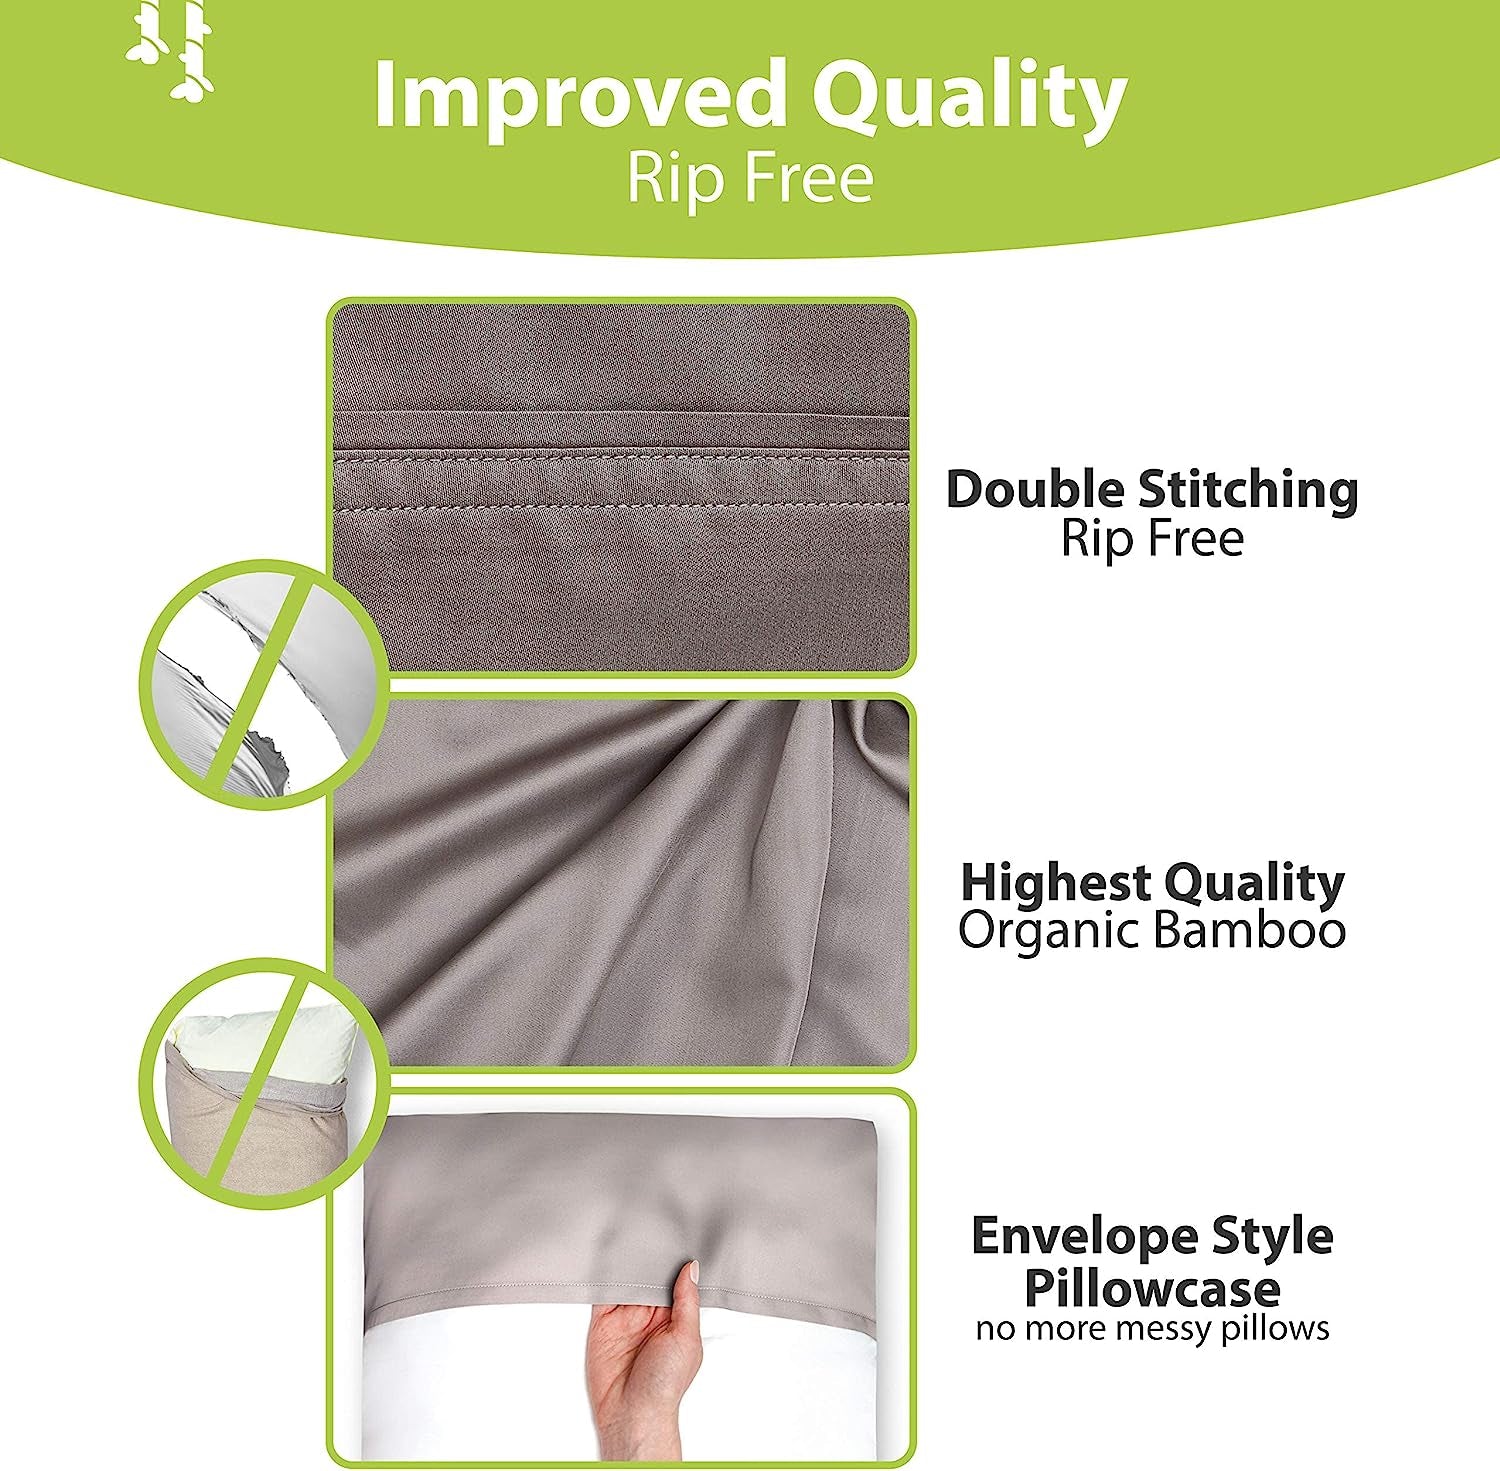 Premium Bamboo-Derived Viscose Pillowcases - Cooling Pillowcases for Hot Sleepers - Set of 2 Queen Size Pillowcases (20X30) - Stone Gray